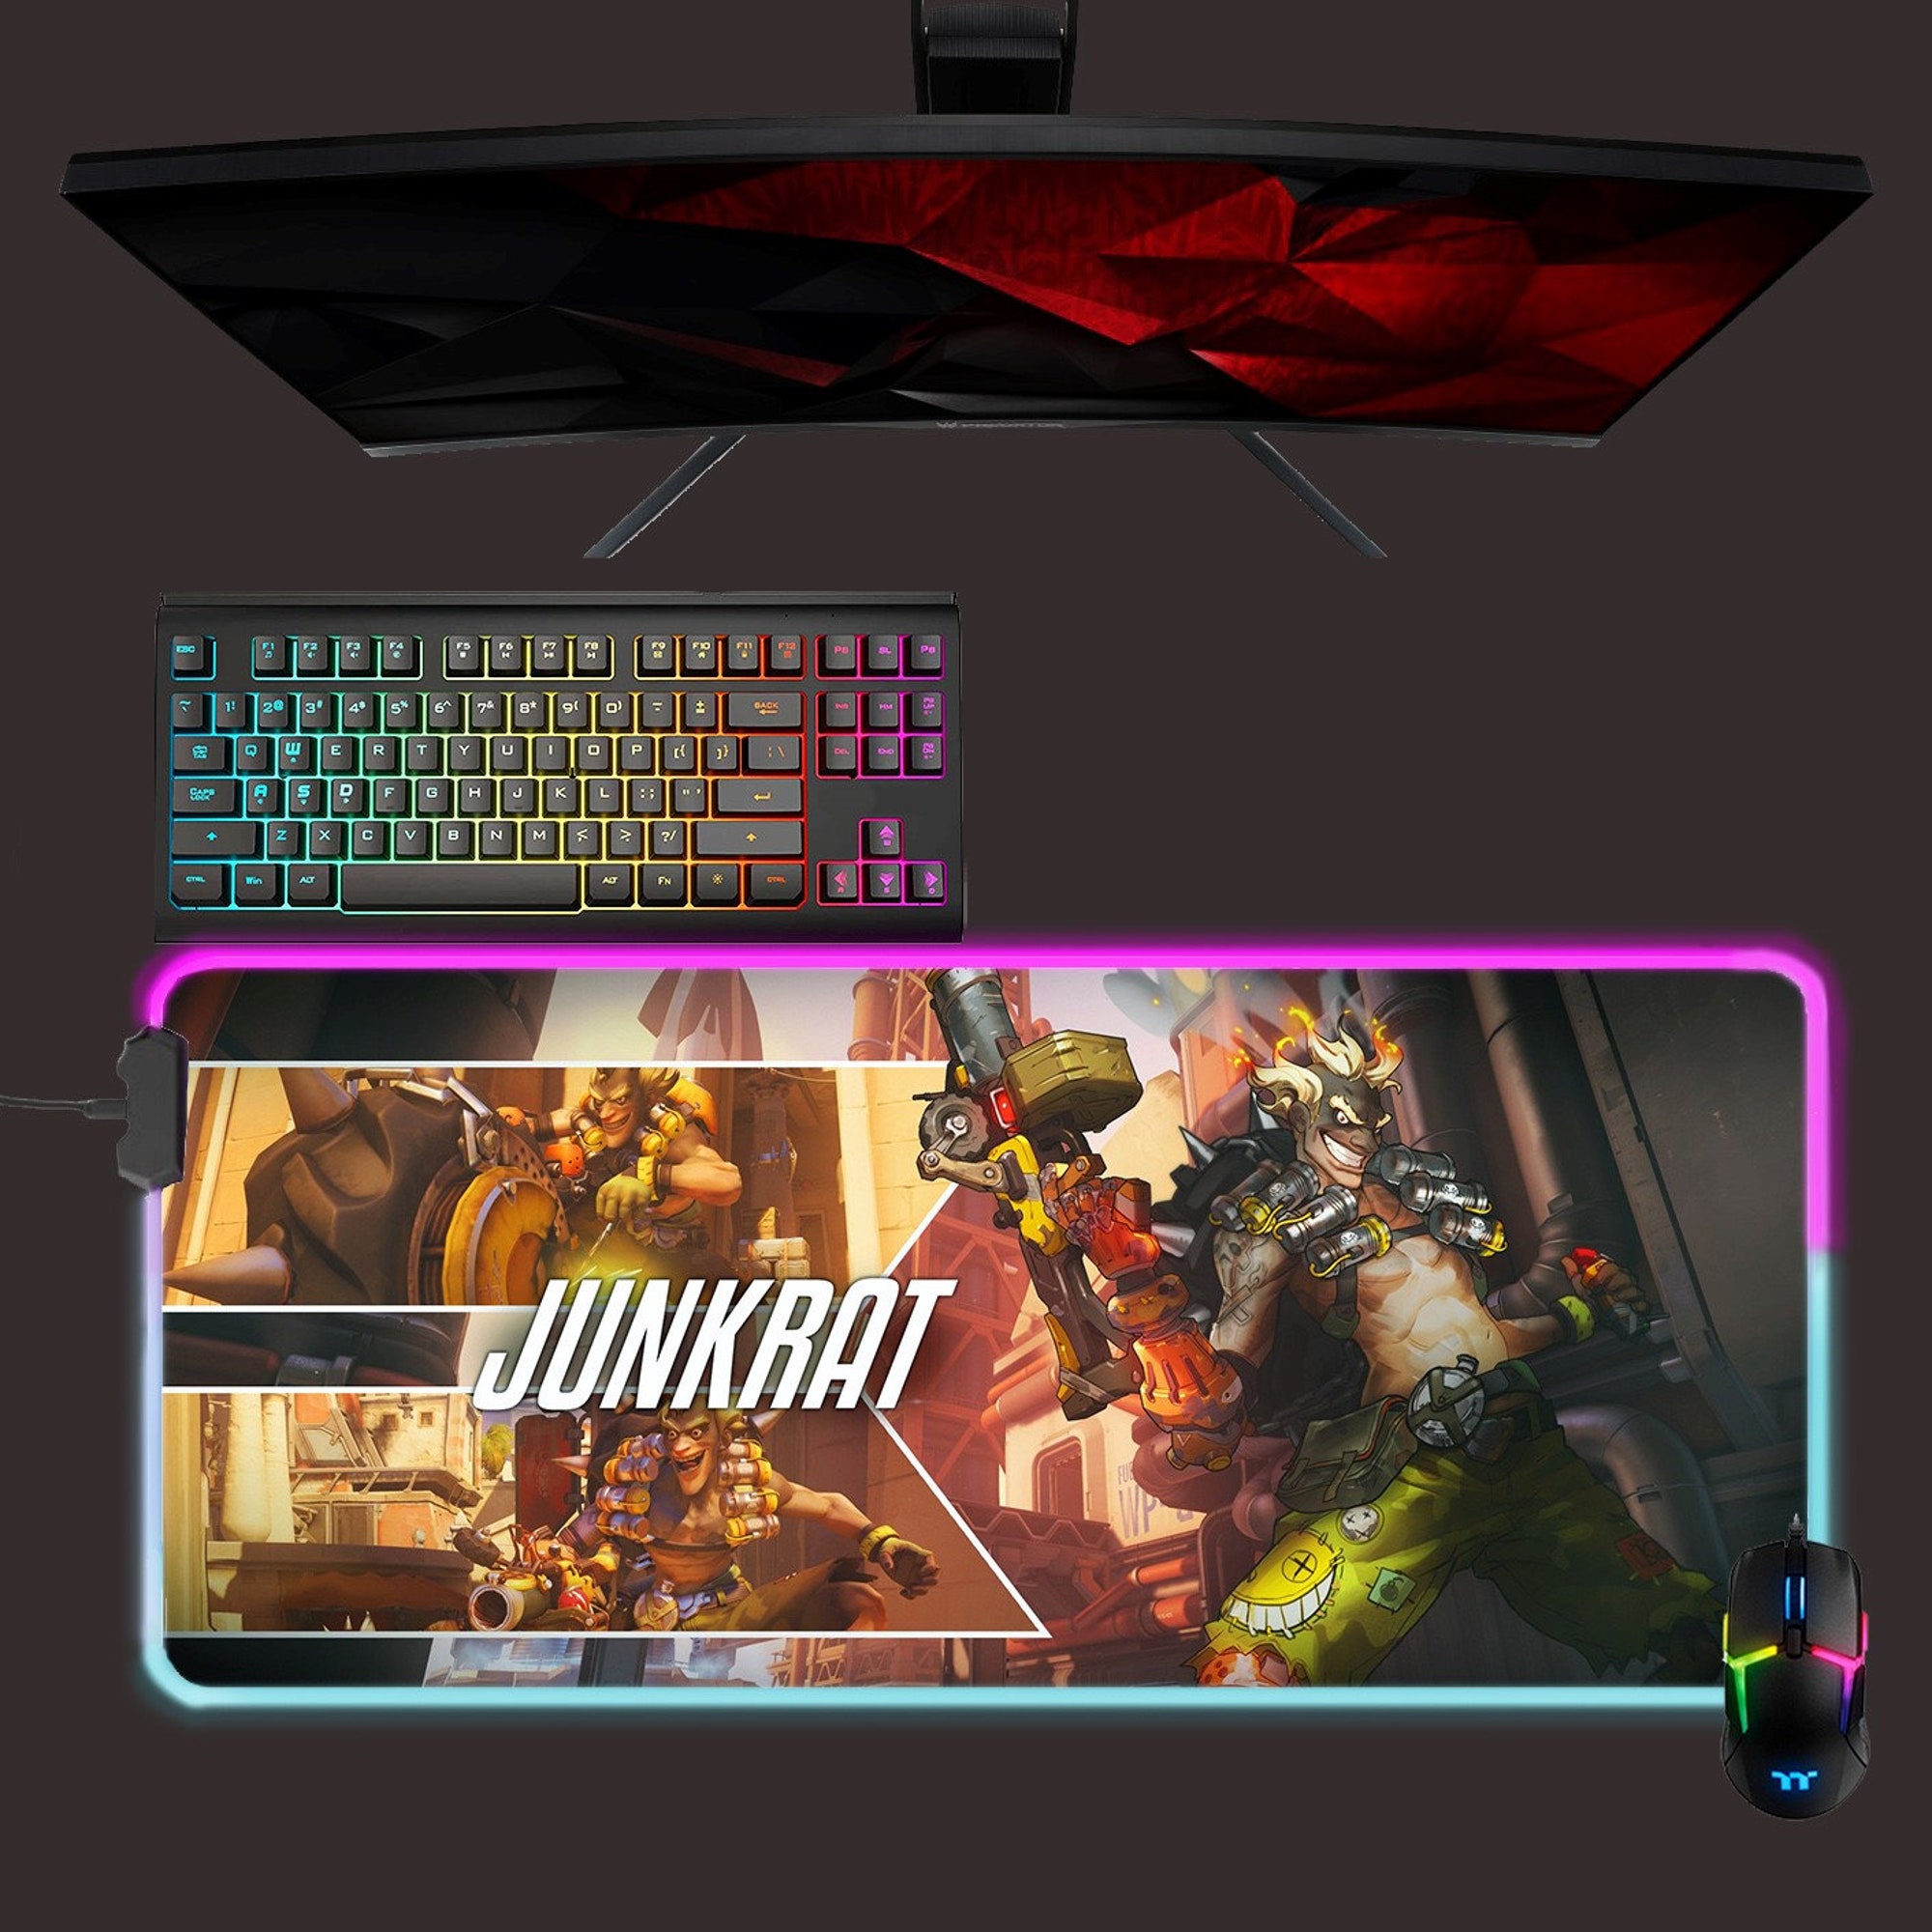 Overwatch led mouse mat, Junkrat rgb mouse pad, gaming mouse pad, gift for gamer